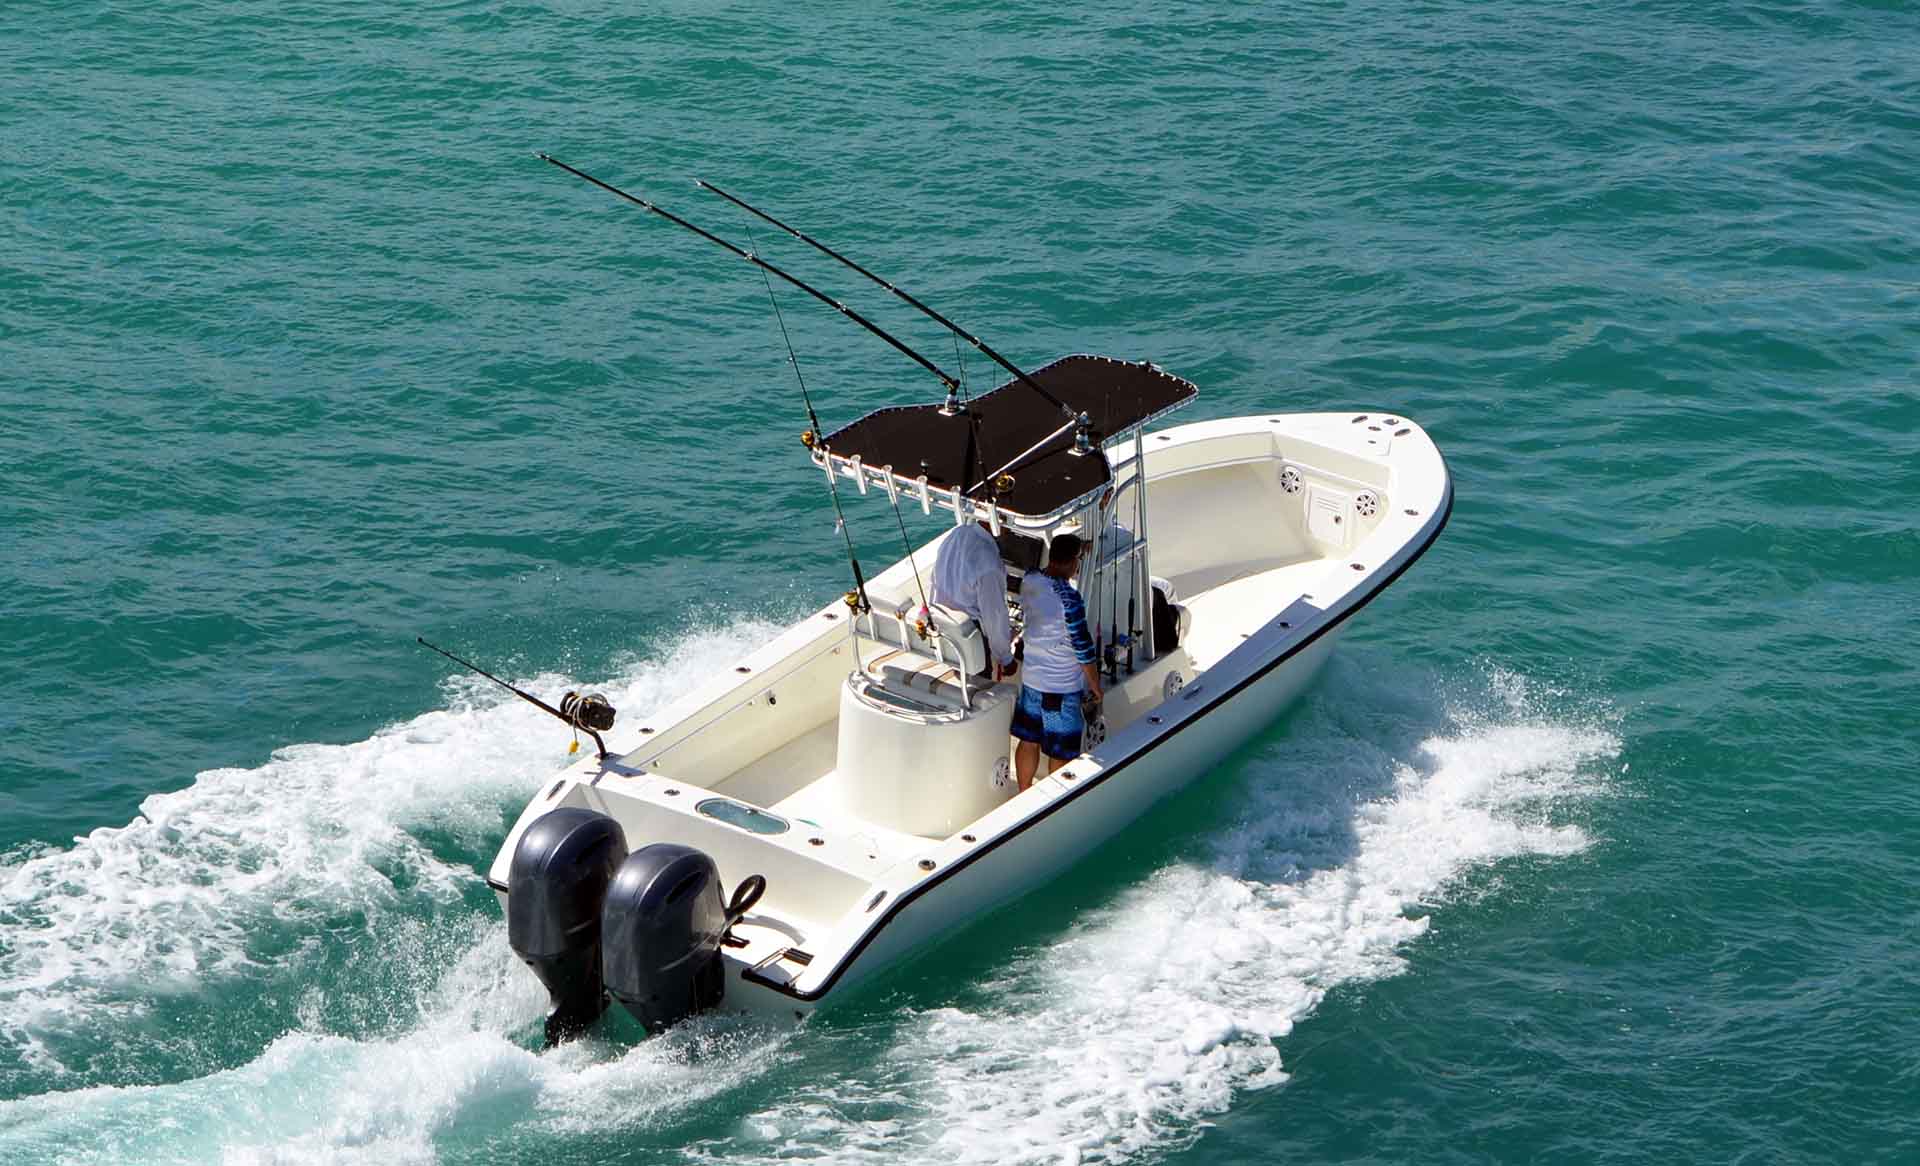 Angled overhead view of an open sport fishing boat